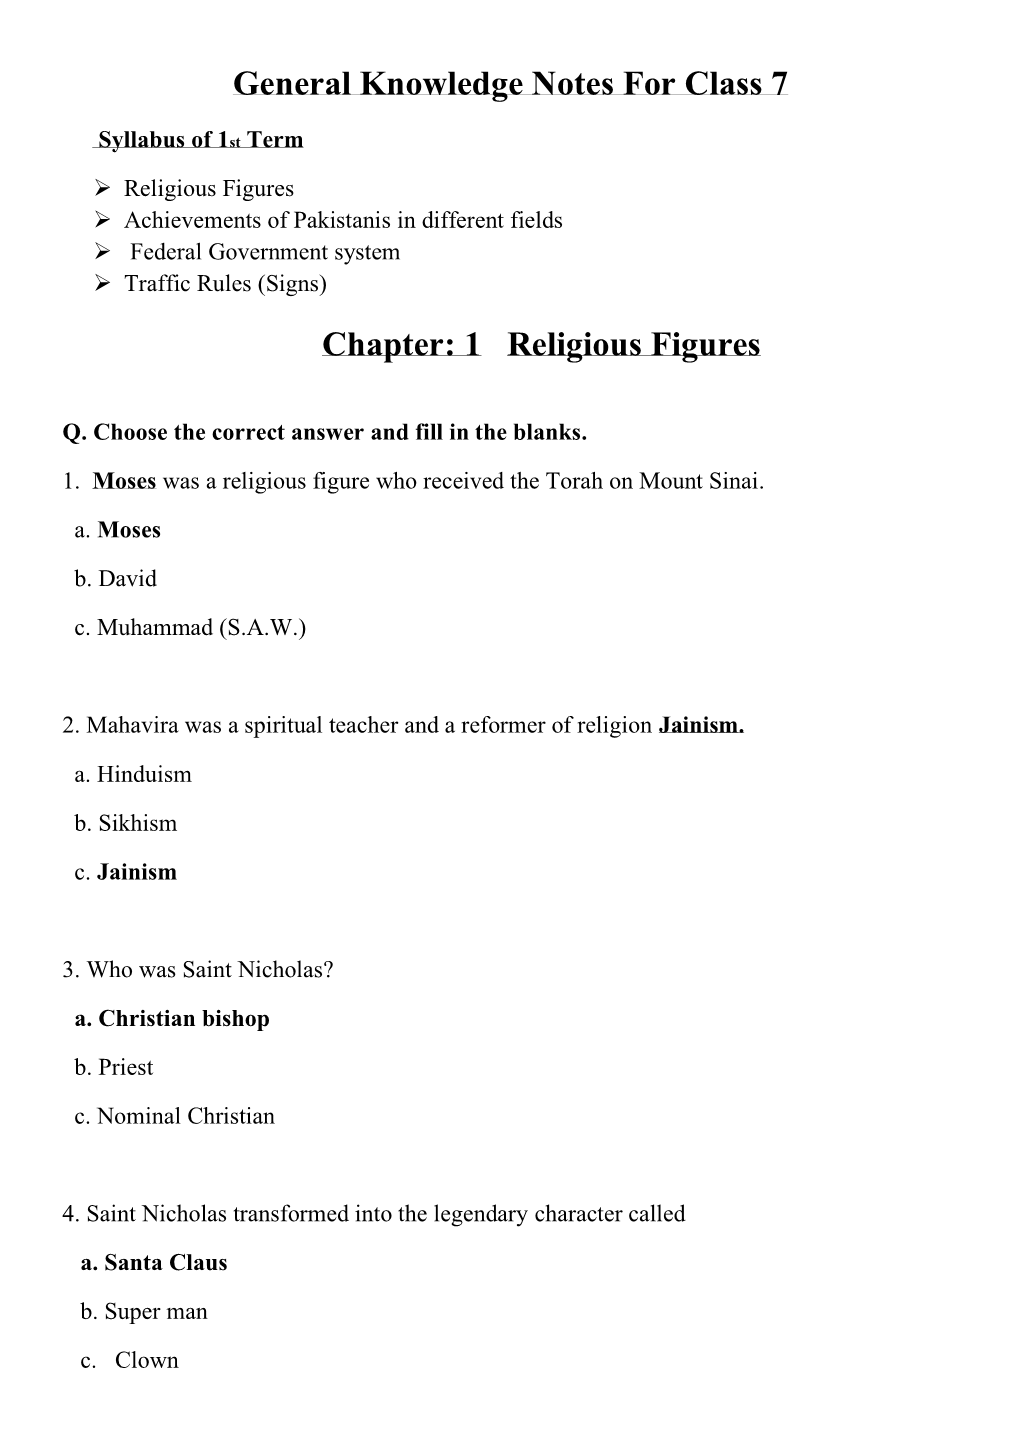 General Knowledge Notes for Class 7 Chapter: 1 Religious Figures